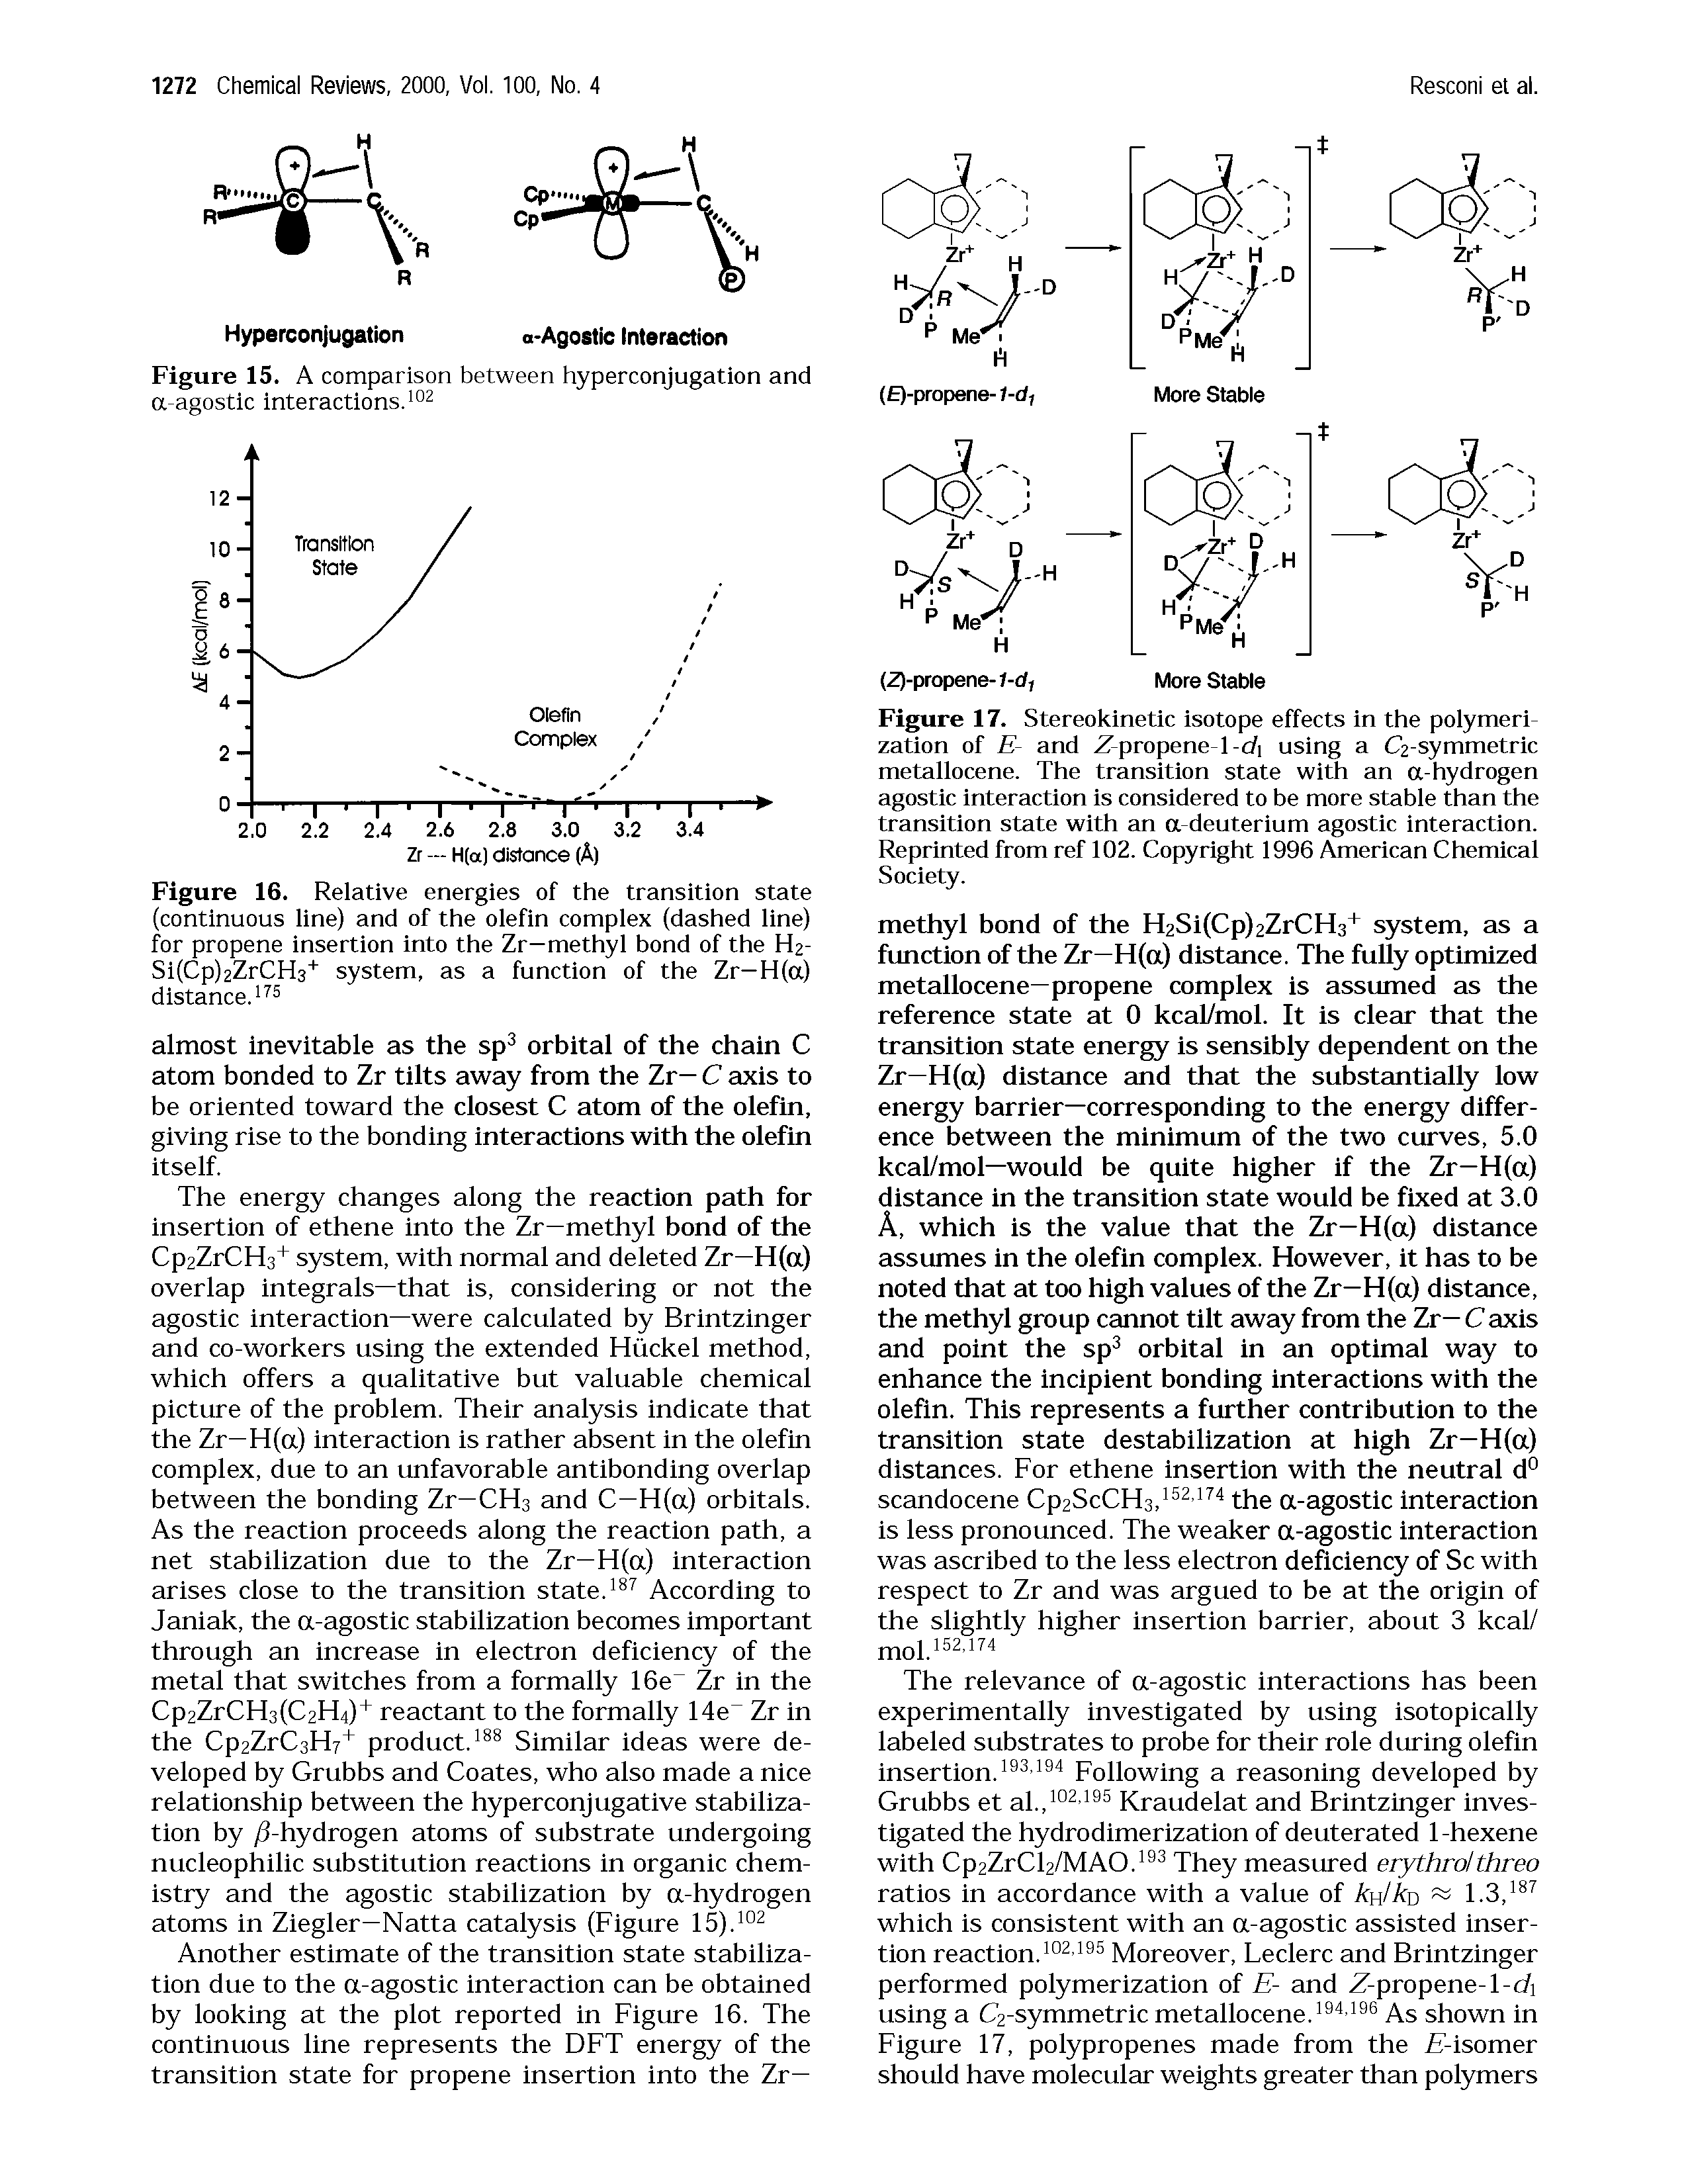 Figure 17. Stereokinetic isotope effects in the polymerization of E- and 2 propene-l-c/i using a C2-symmetric metallocene. The transition state with an a-hydrogen agostic interaction is considered to be more stable than the transition state with an a-deuterium agostic interaction. Reprinted from ref 102. Copyright 1996 American Chemical Society.